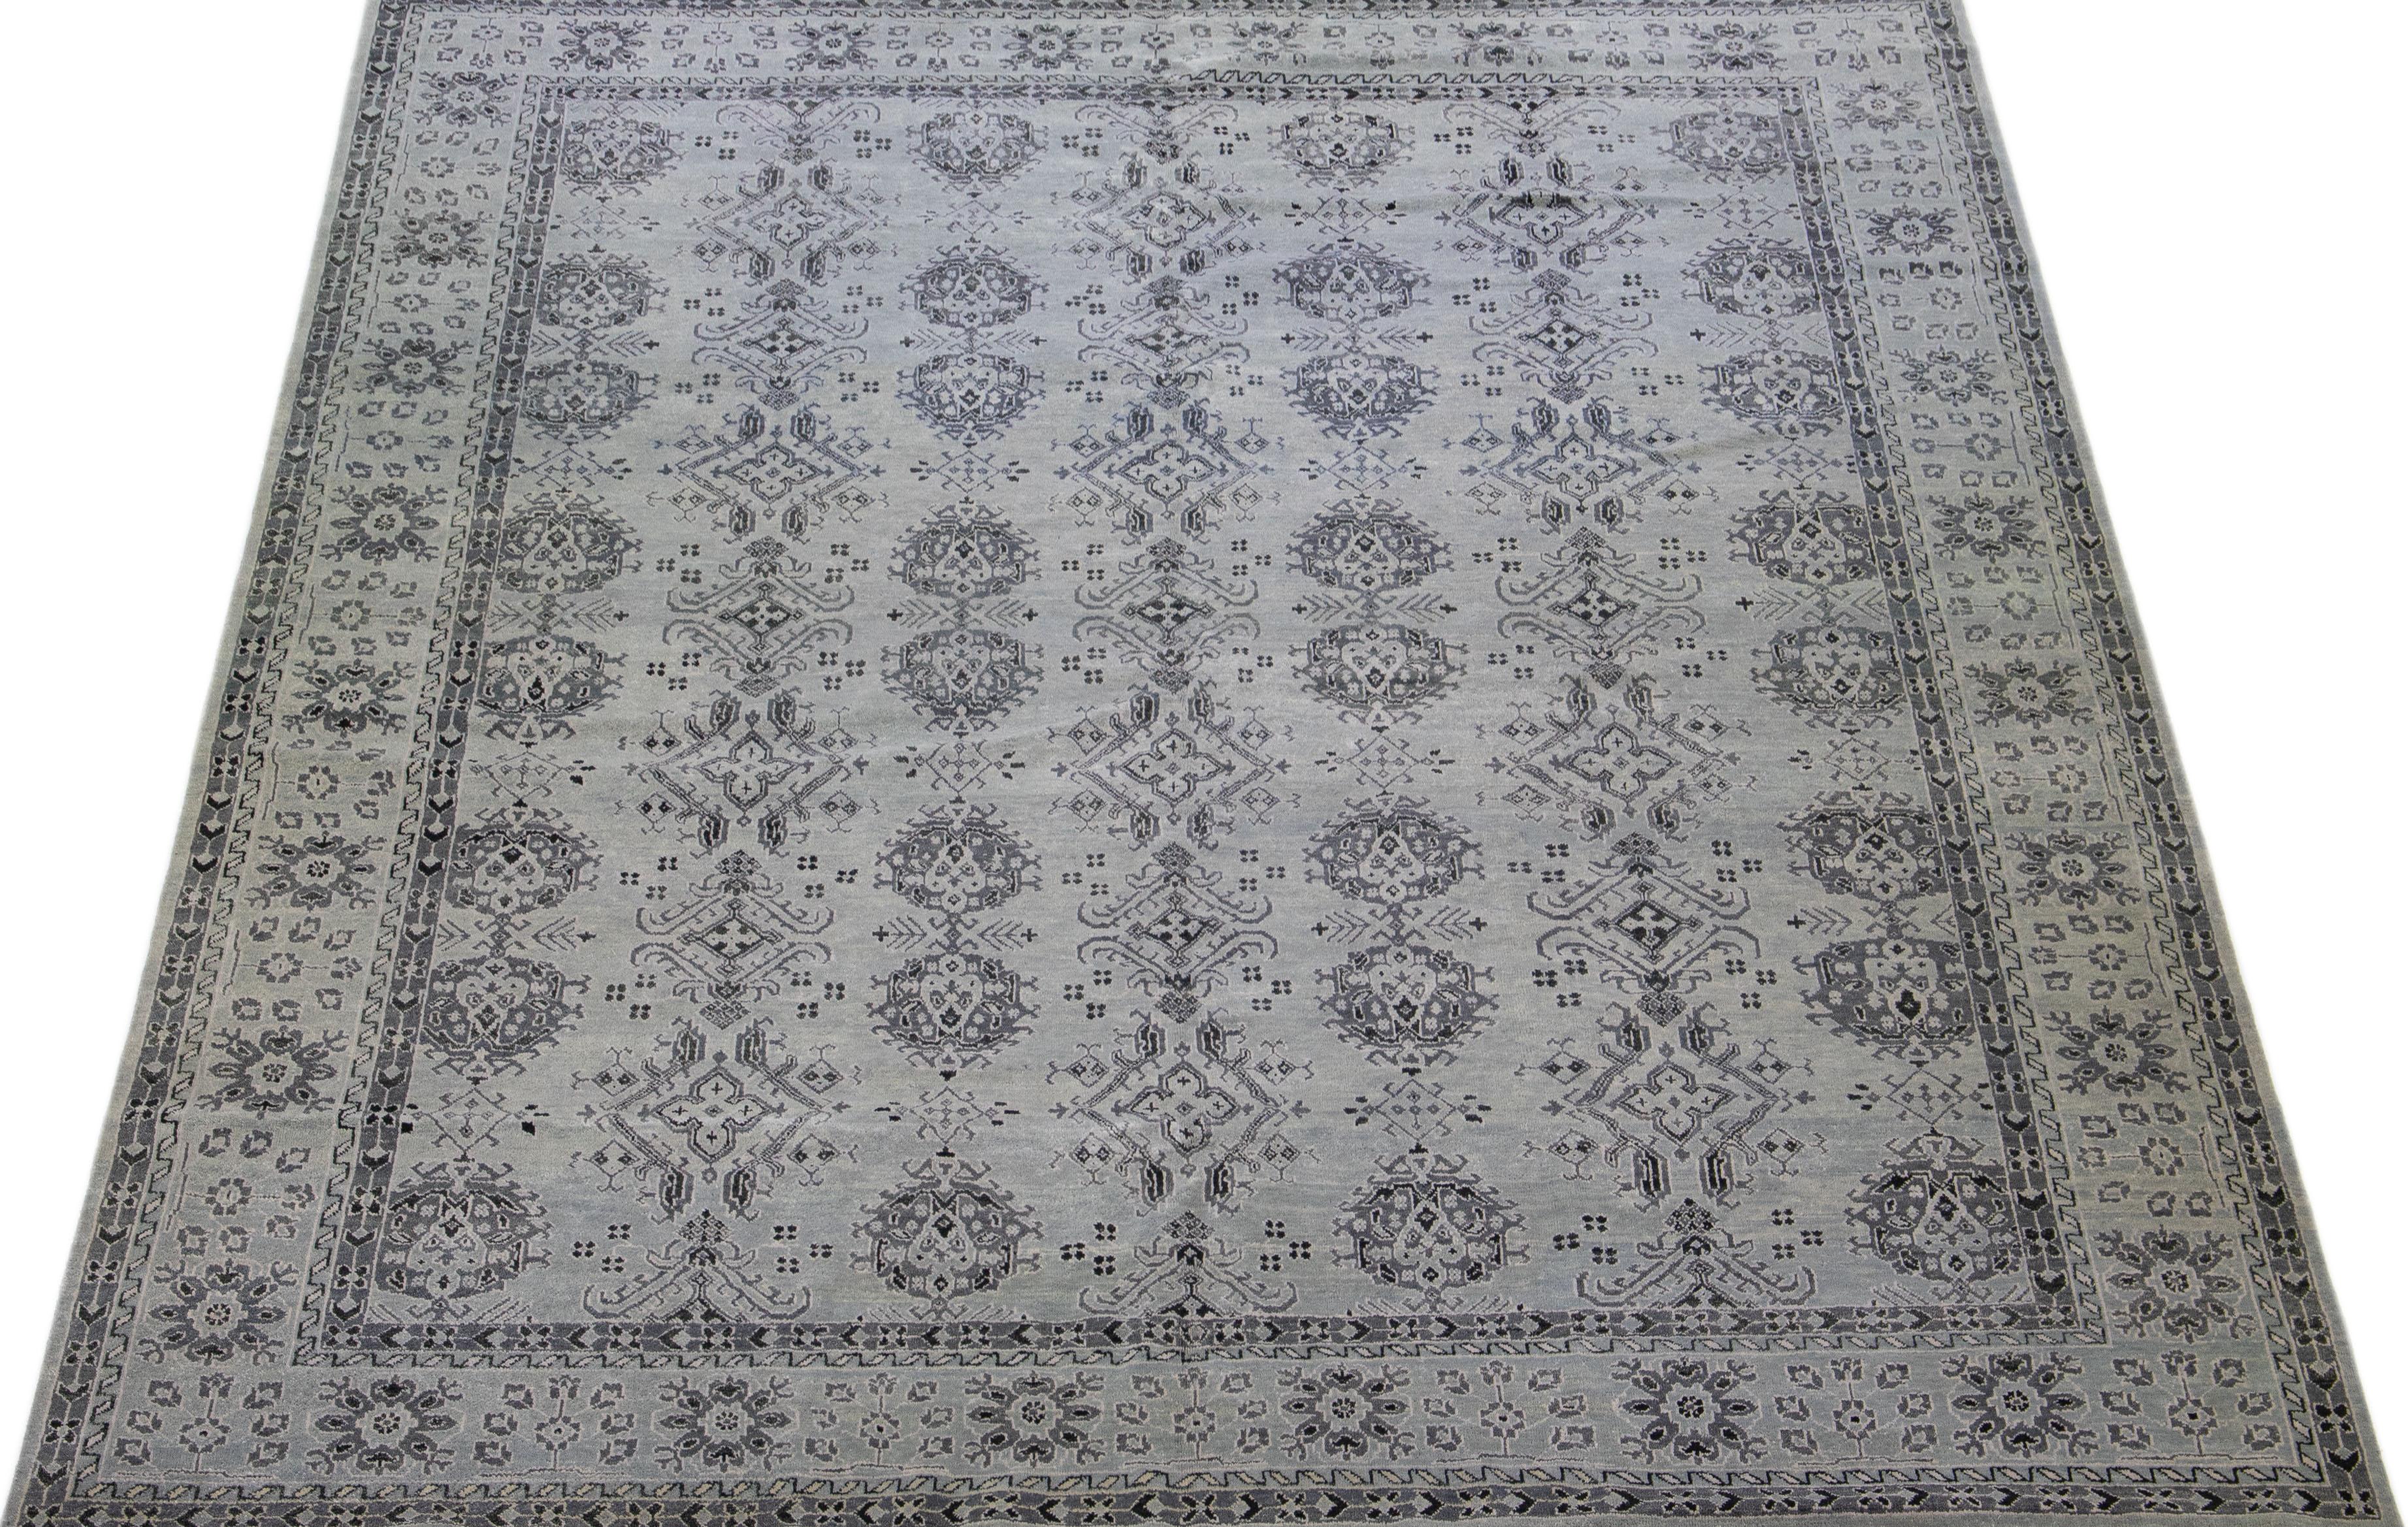 Beautiful modern Oushak hand-knotted wool rug with a light gray color field. This Piece has dark grey accent colors in a gorgeous all-over pattern design.

This rug measures: 12' x 14'9